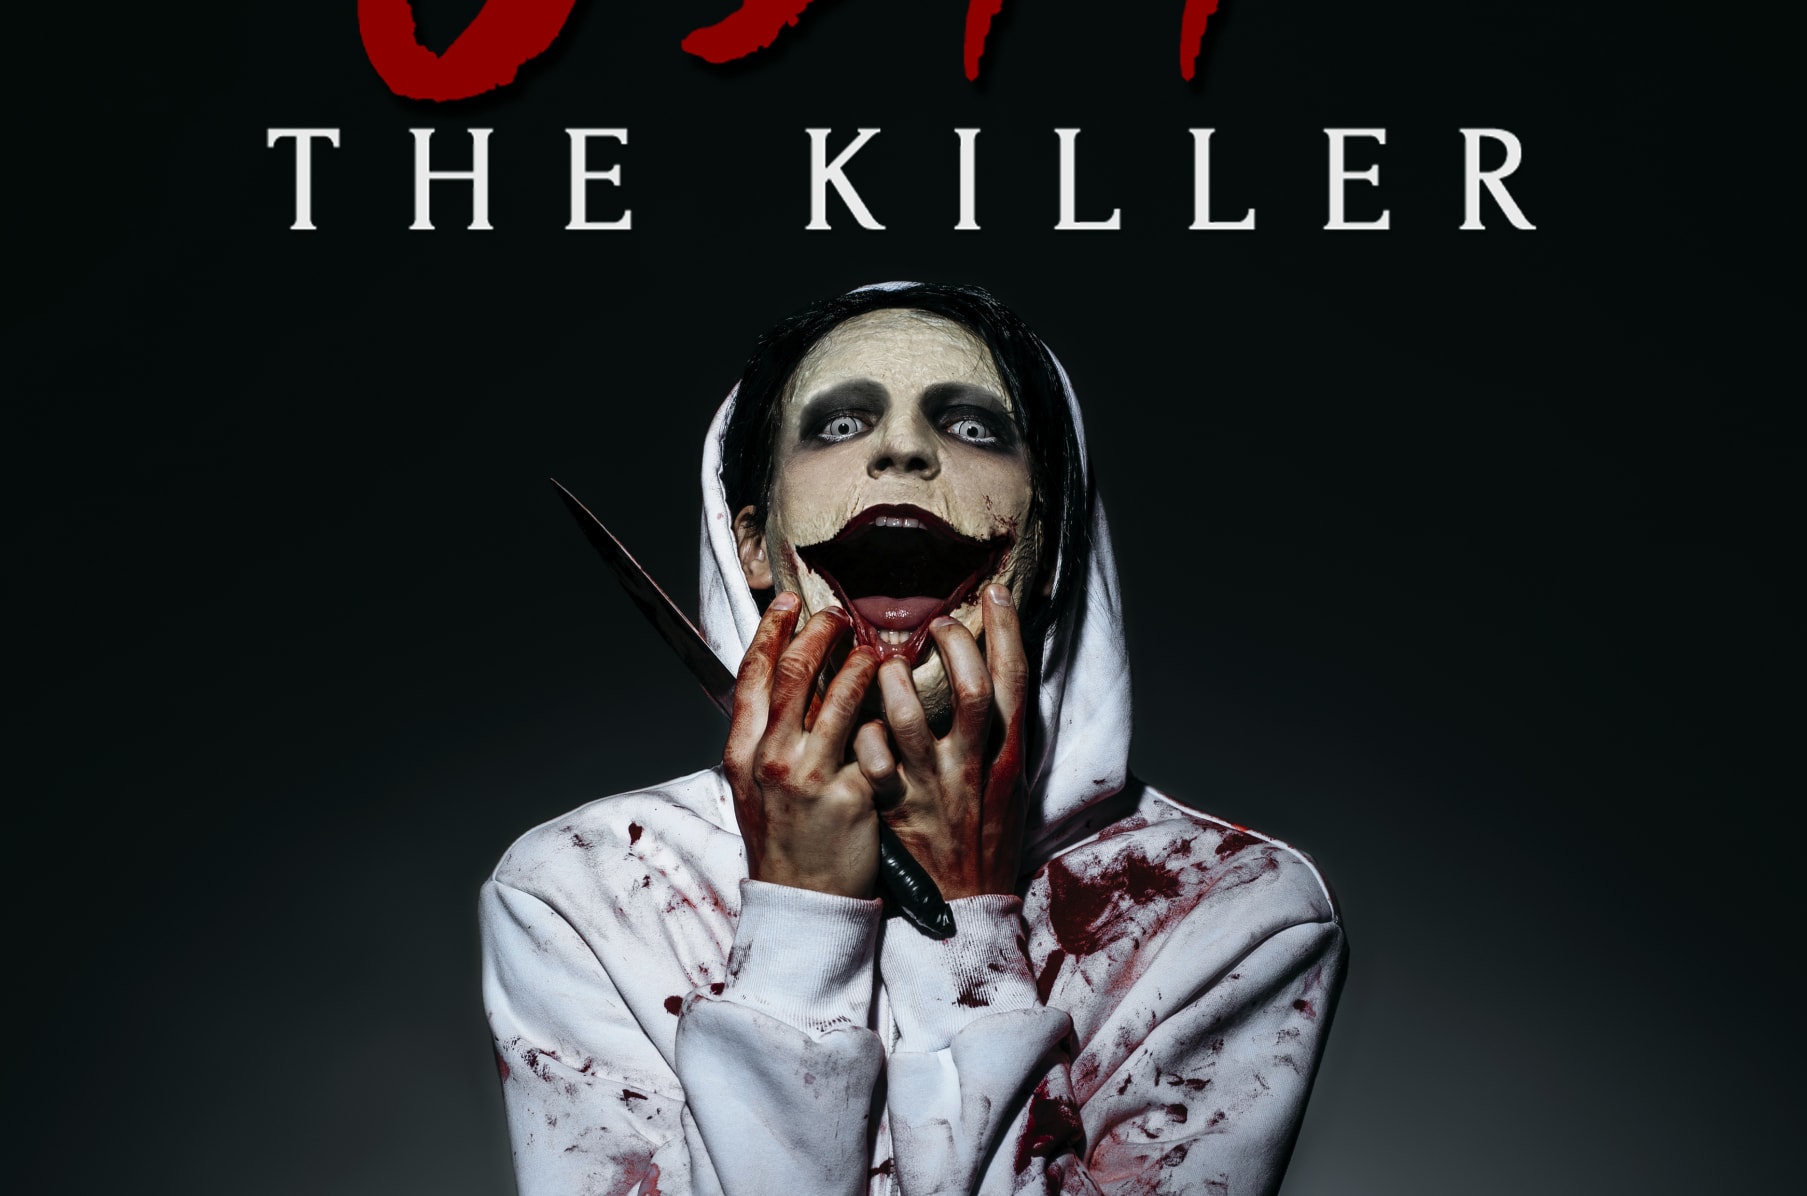 What If Jeff The Killer Movie Was A Horror 2000s? Fan Casting on